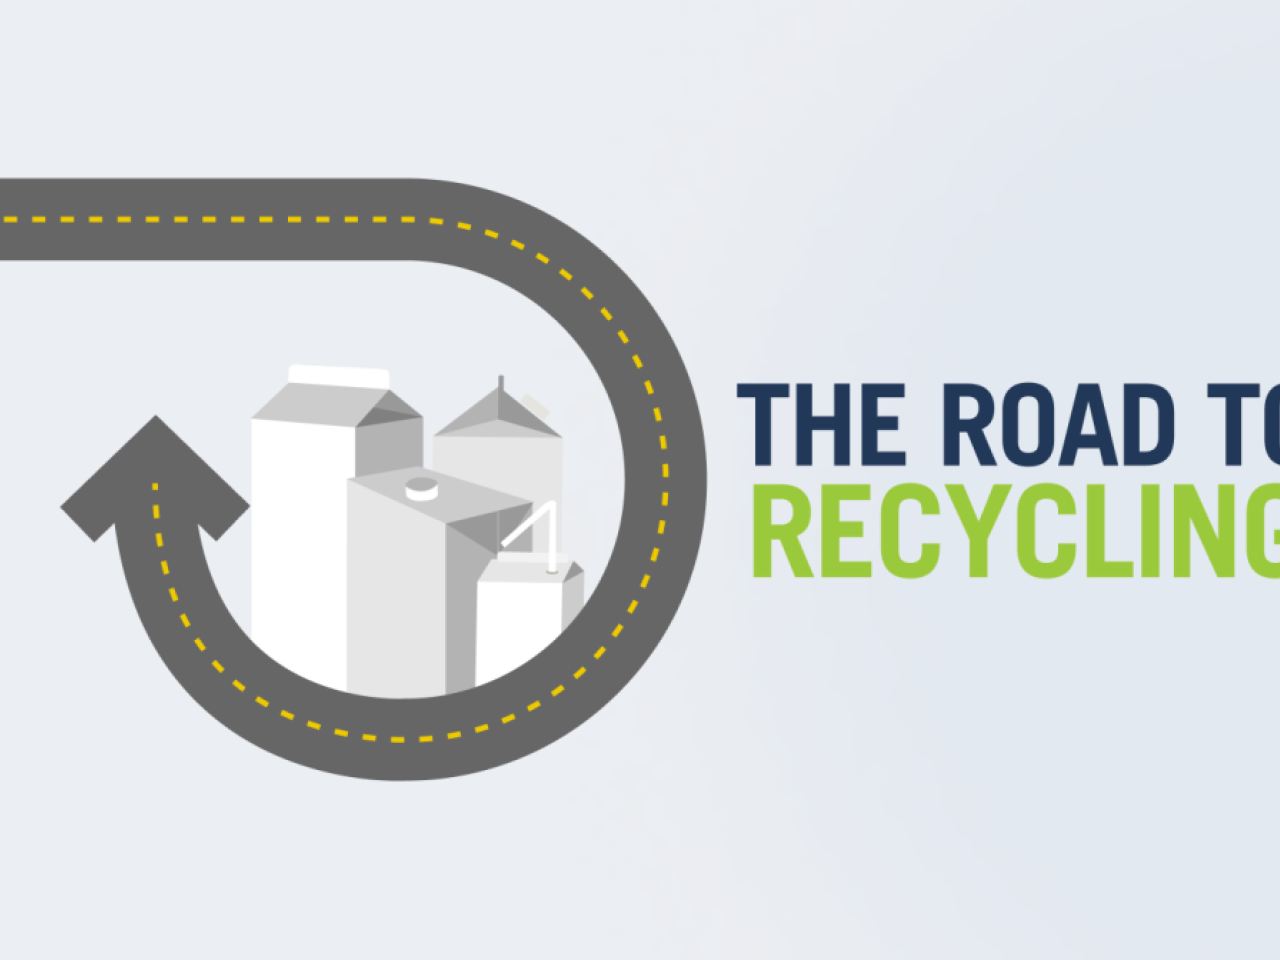 The road to recycling